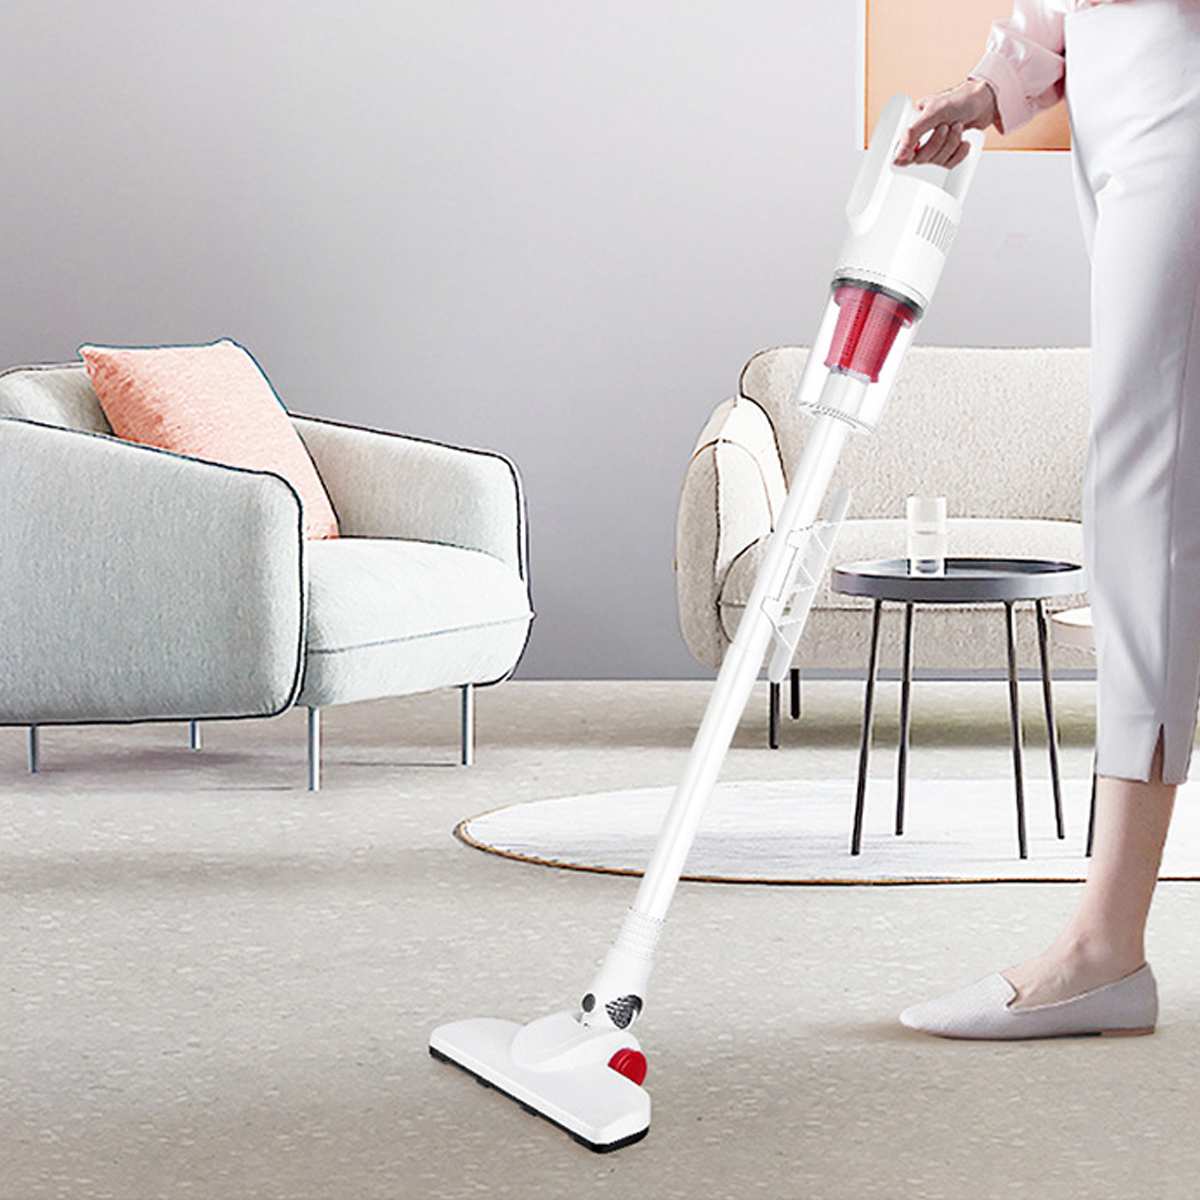 12000Pa 2 In 1 Portable Handheld Cordless Vacuum Cleaner Strong Suction Dust Collector Stick Aspirator Led Light Stick Handheld